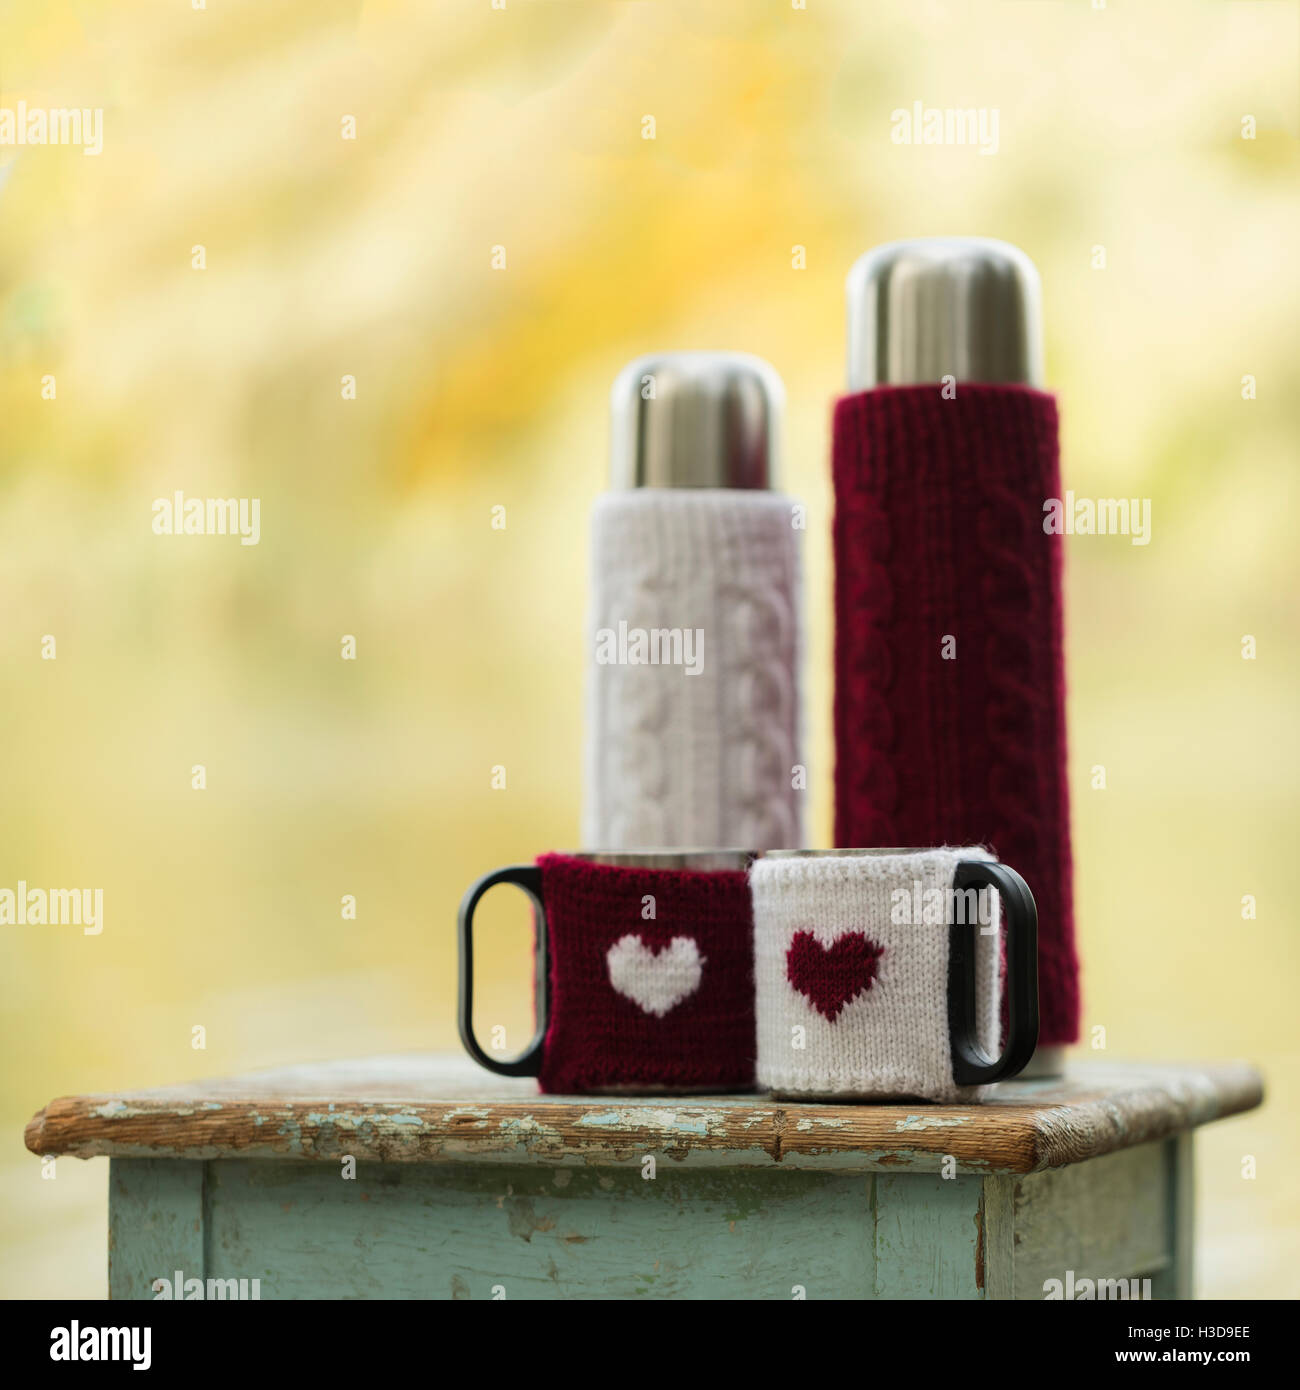 https://c8.alamy.com/comp/H3D9EE/rustic-style-on-the-old-stool-is-a-thermos-with-cups-in-knitted-covers-H3D9EE.jpg